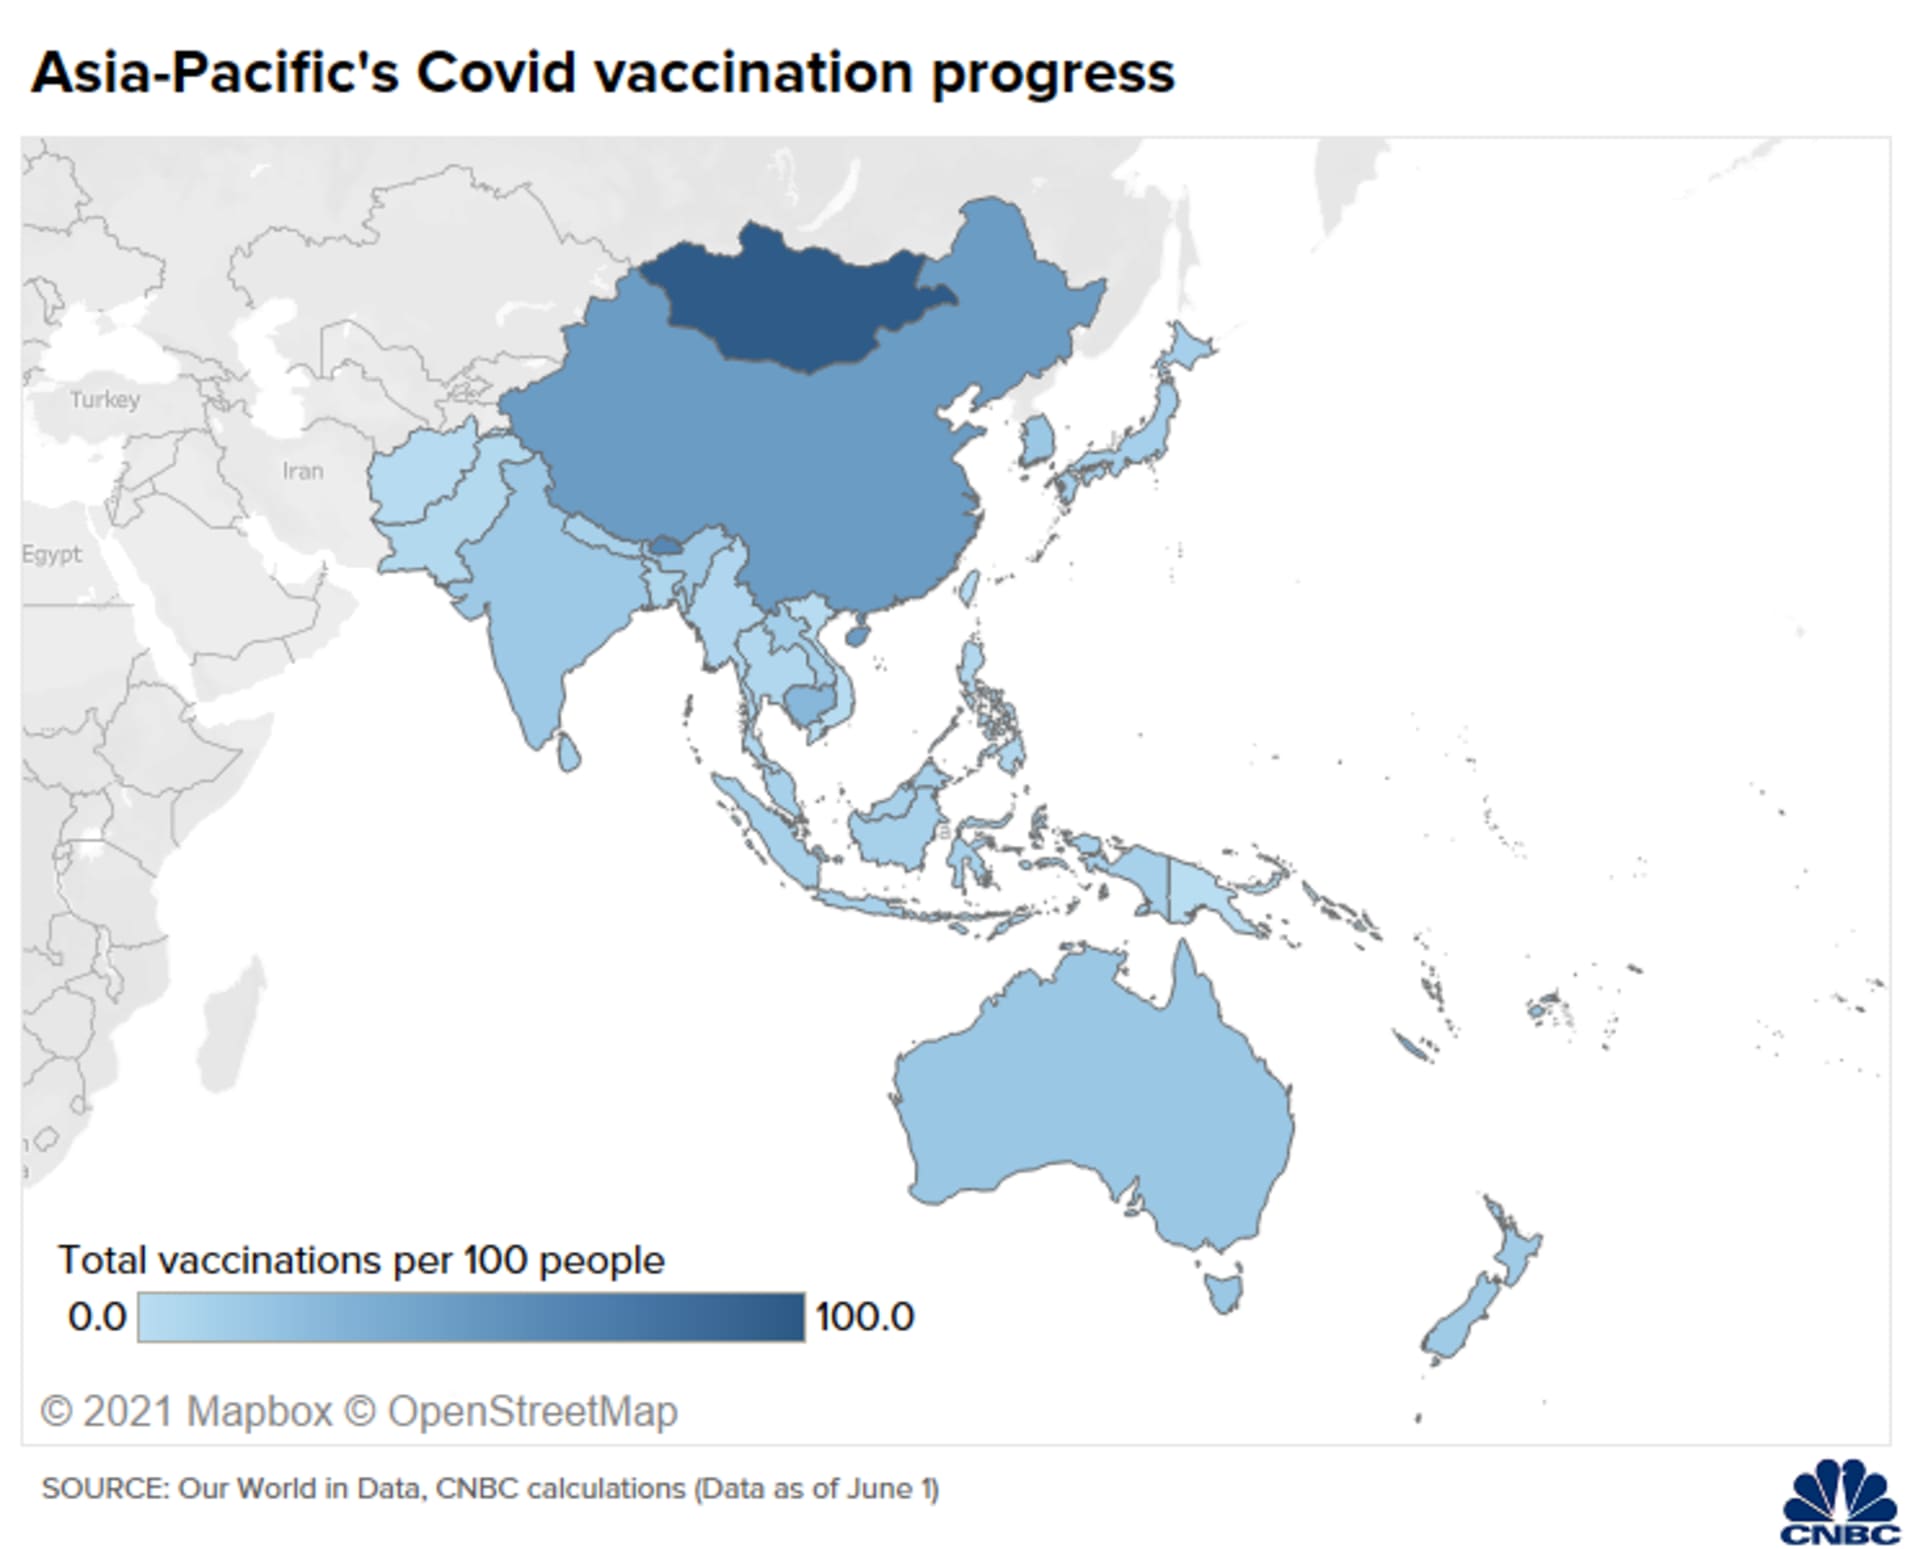 Map of the progress in Covid-19 vaccinations among Asia-Pacific countries